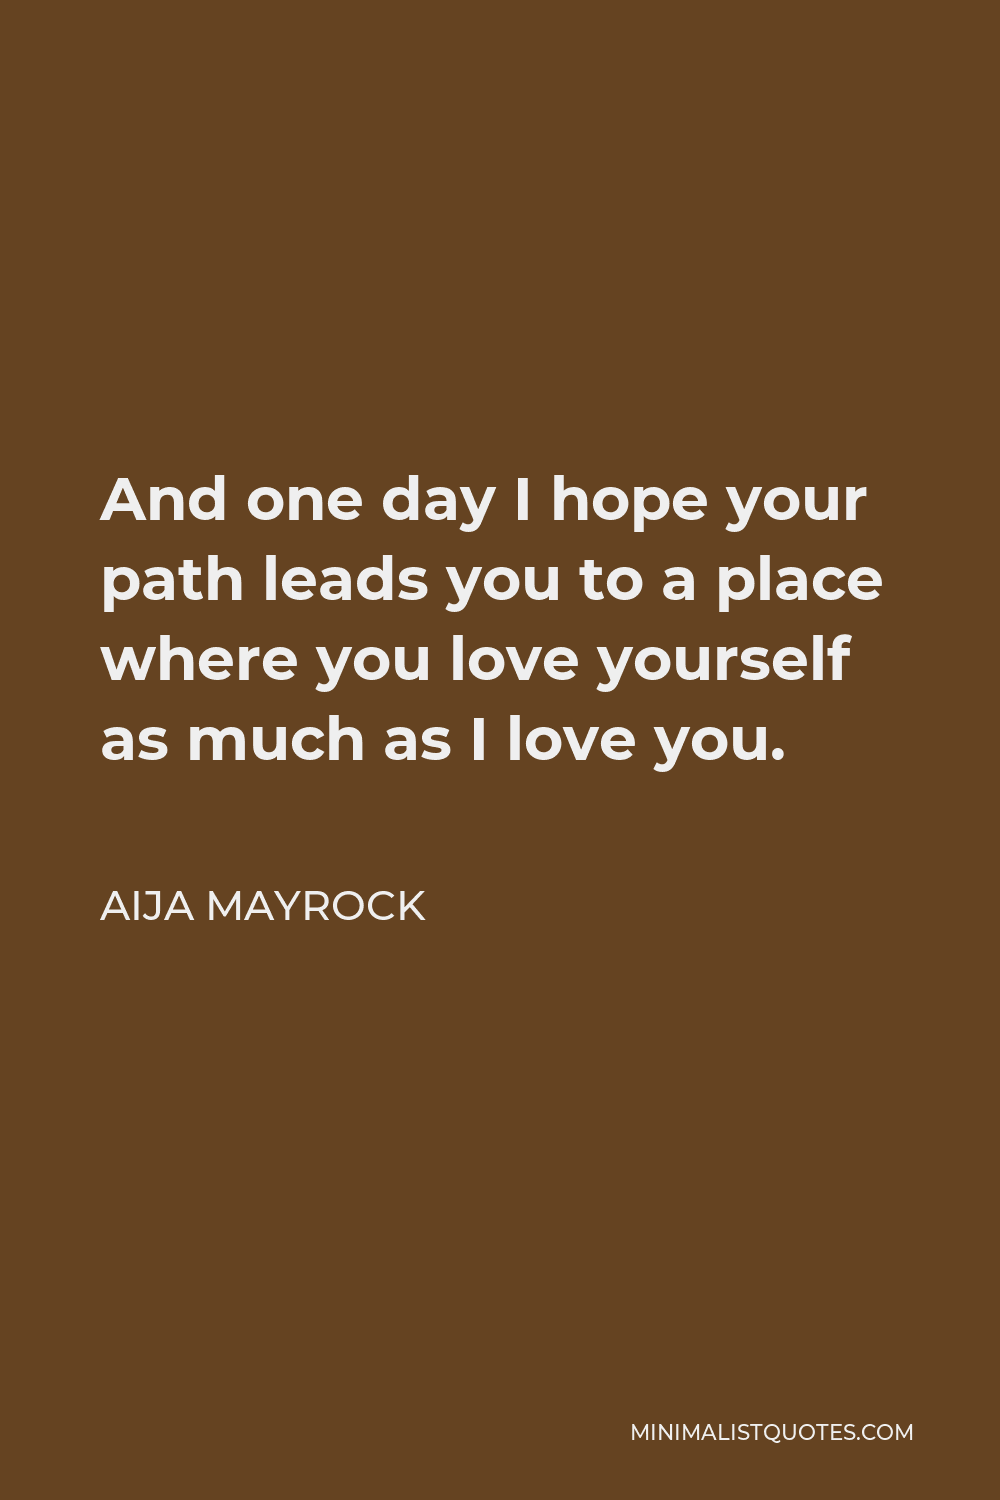 Aija Mayrock Quote - And one day I hope your path leads you to a place where you love yourself as much as I love you.